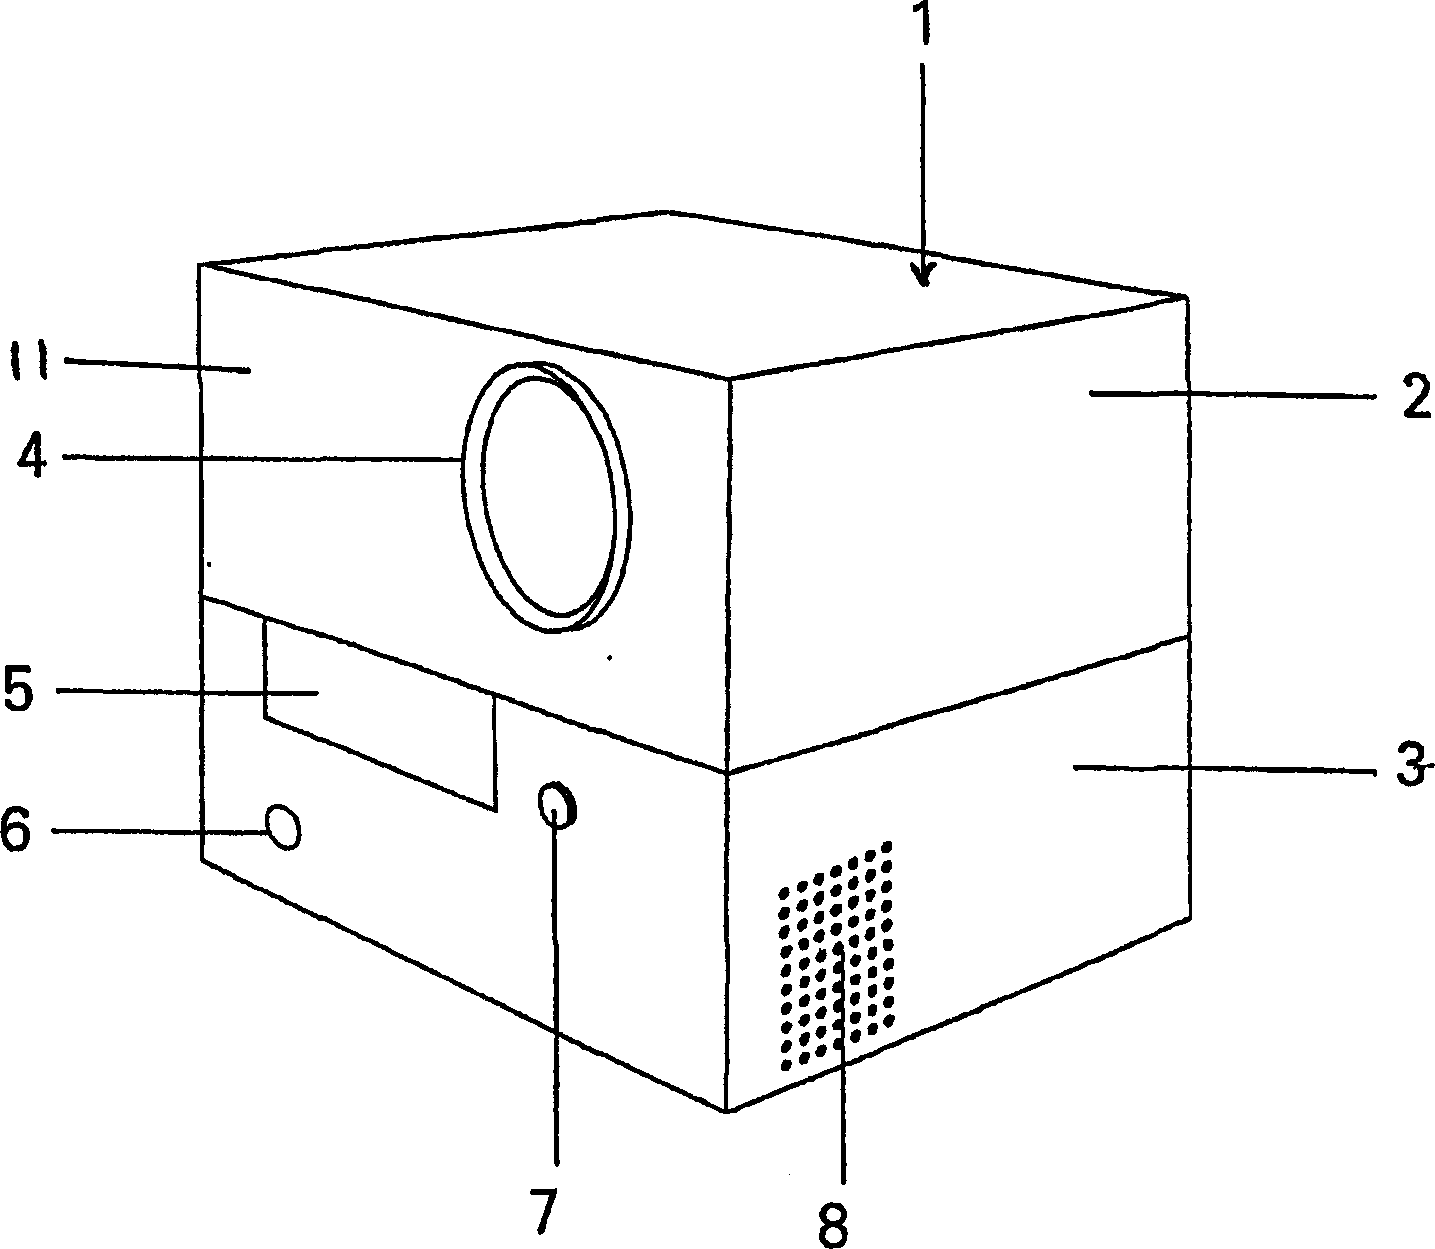 Portable projection device